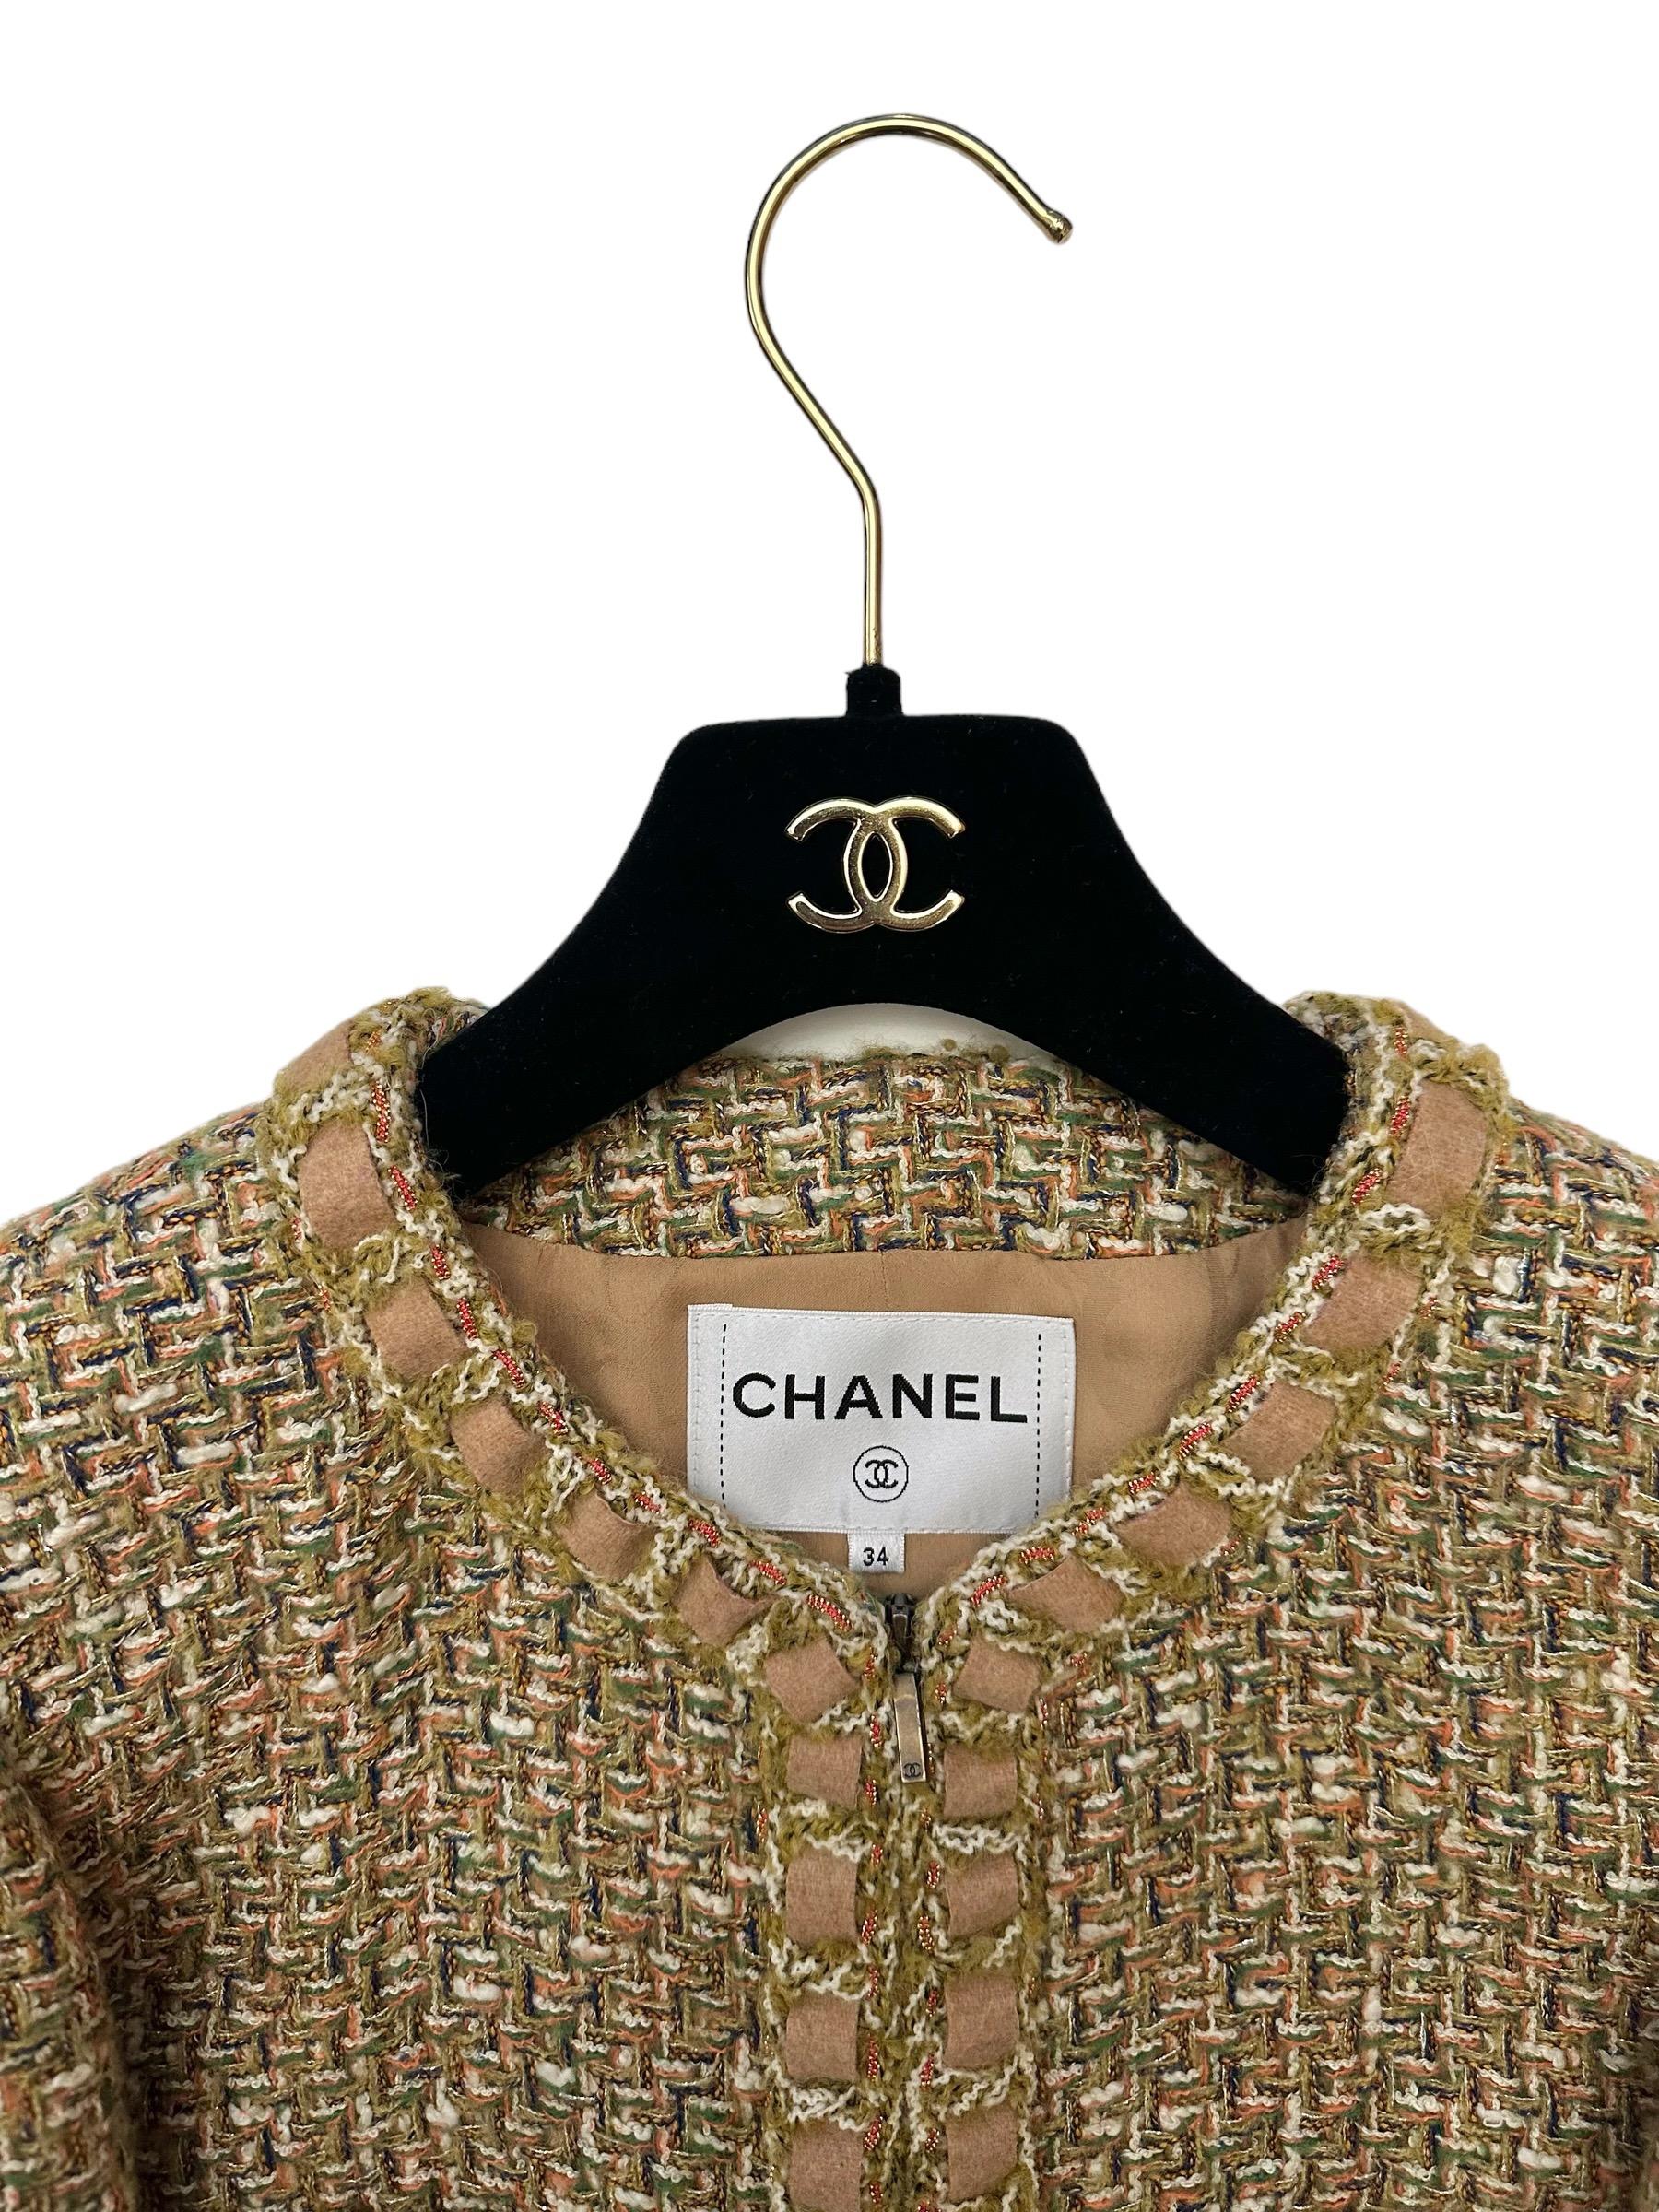 Chanel Métiers d'Art Paris-Rome Fall 2016 Tweed Jacket In Good Condition For Sale In Geneva, CH